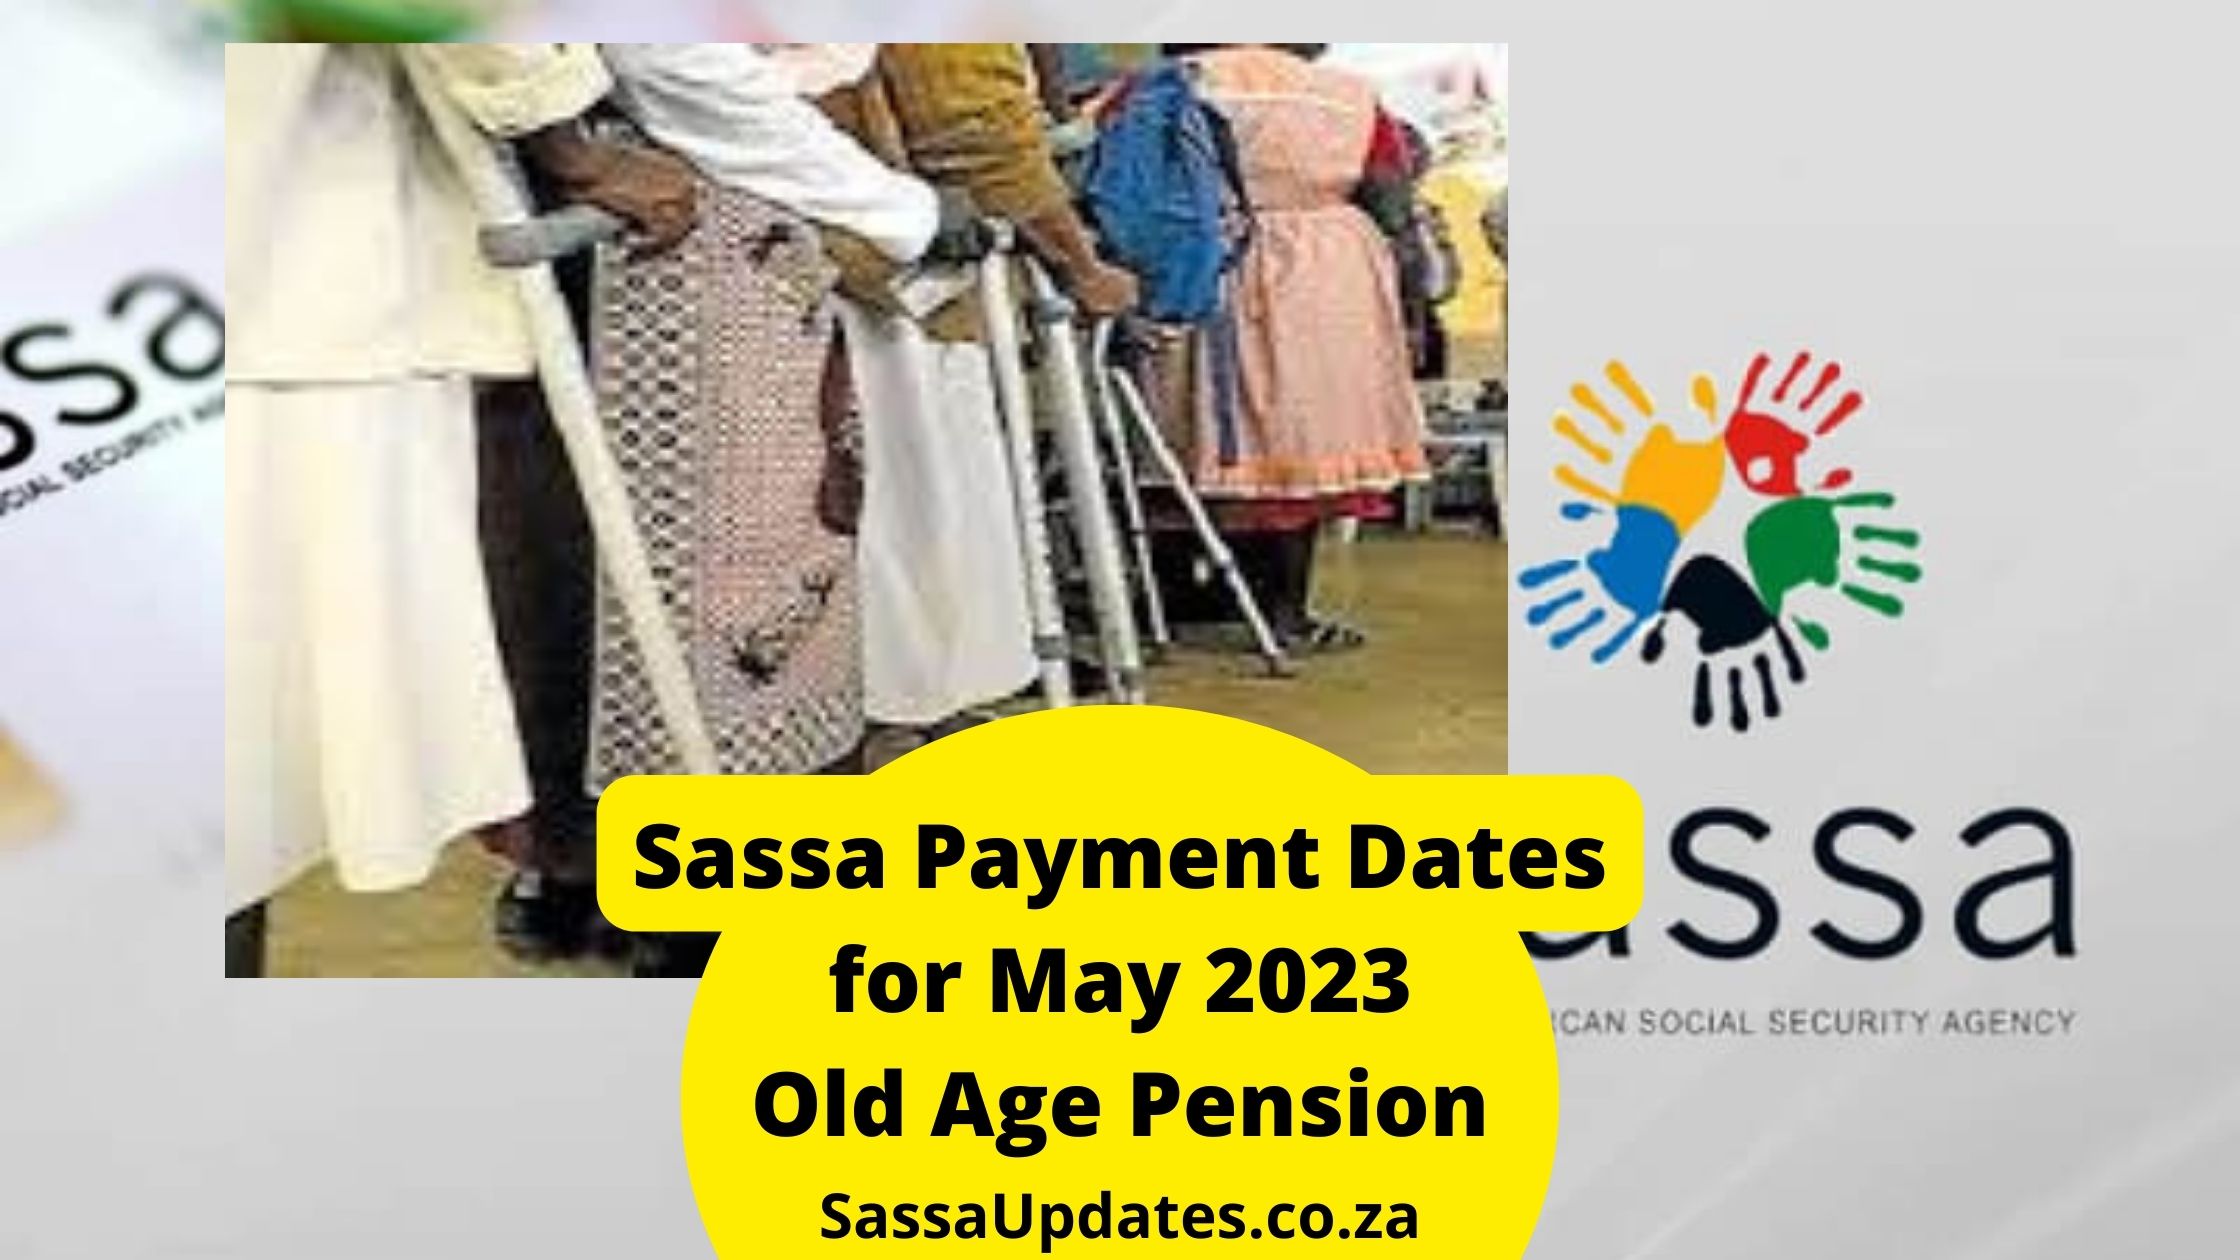 Sassa Payment Dates for May 2023 Old Age Pension